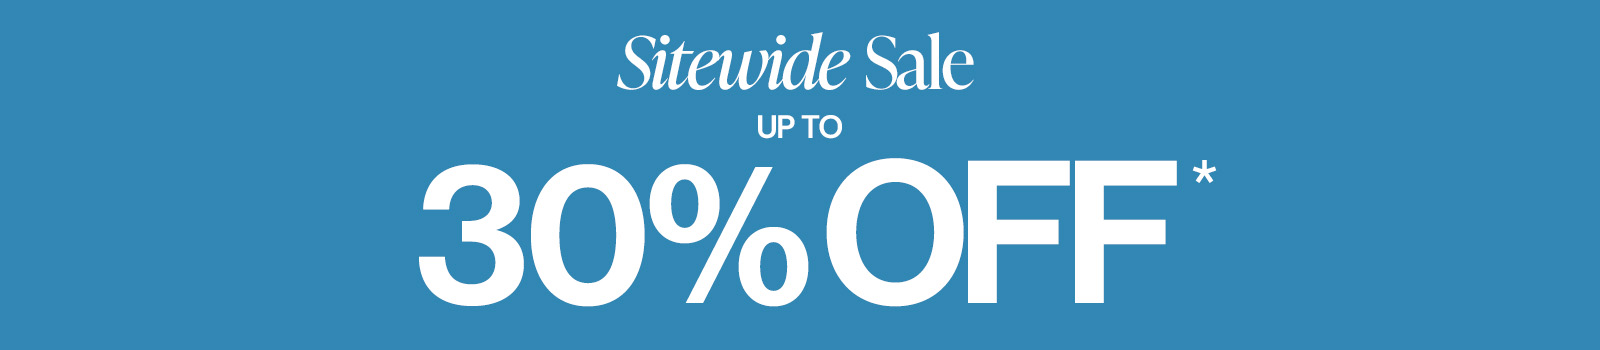 Sitewide Sale up to 30 off*